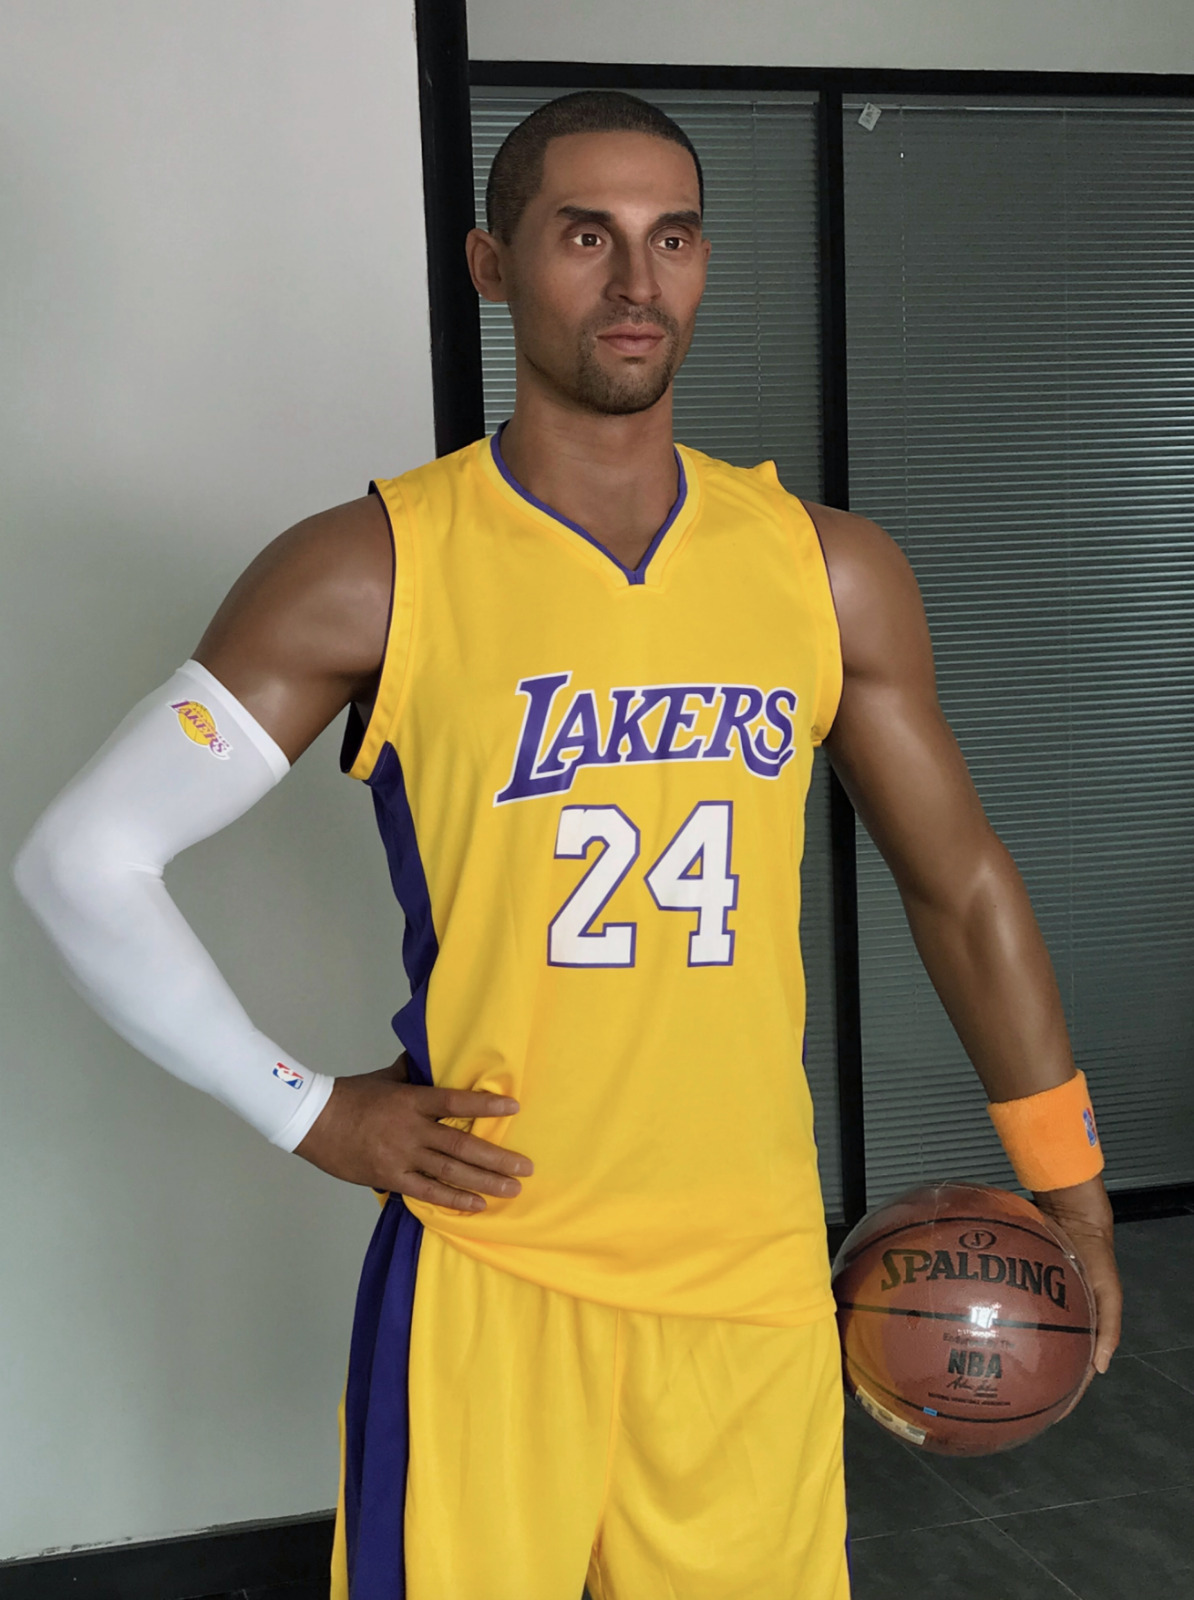 Life Size Kobe Bryant Lakers Posing Wax Statue Movie Star Prop Display Style 1:1